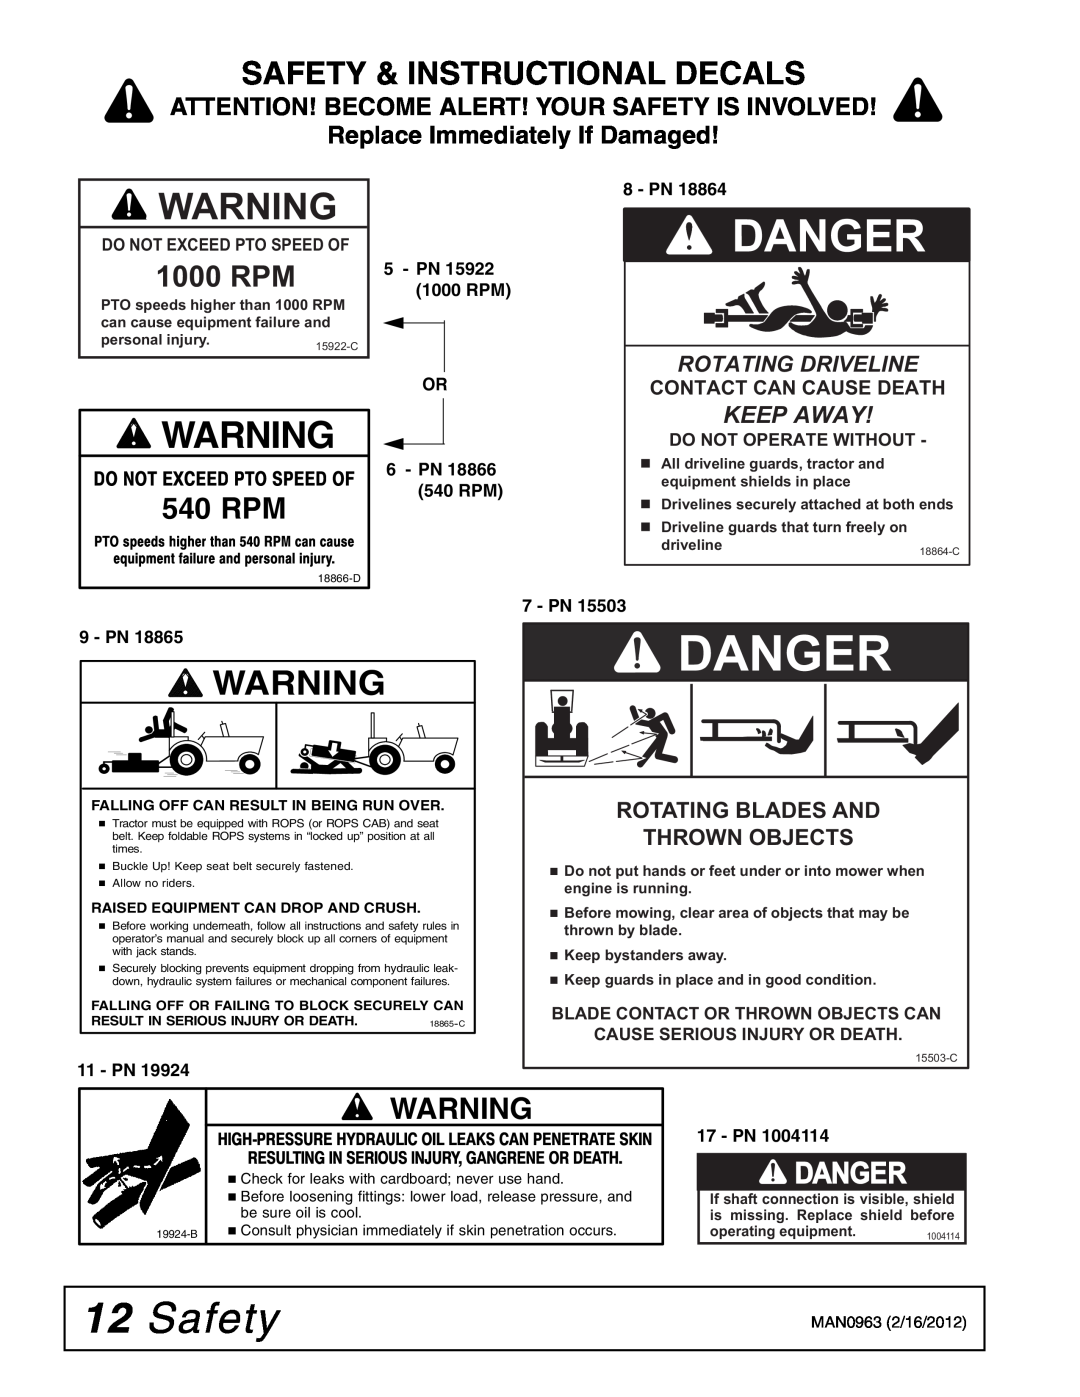 Woods Equipment BW180XHDQ Danger, Safety & Instructional Decals, 1000 RPM, Replace Immediately If Damaged, Keep Away 